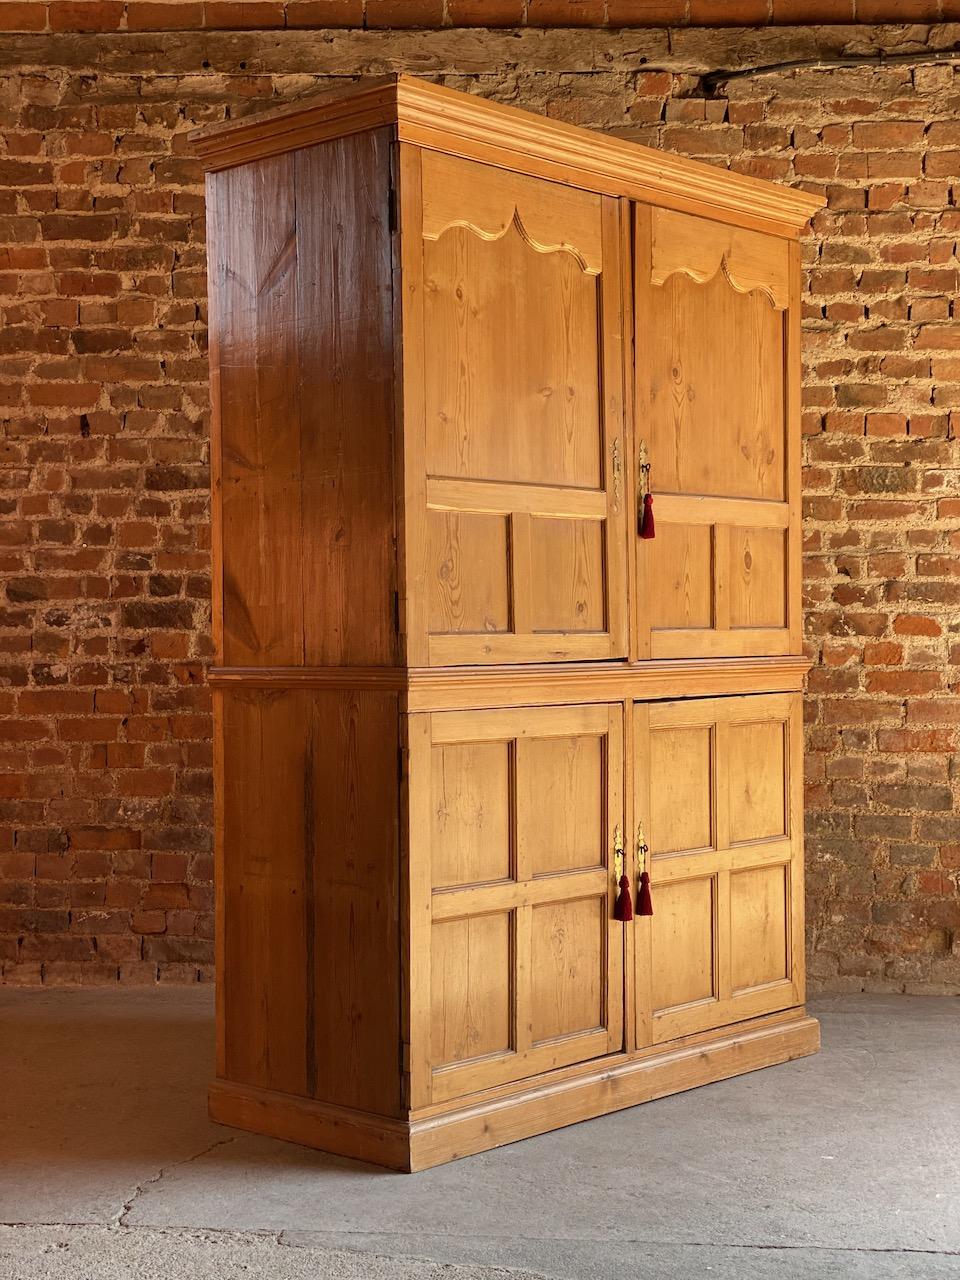 Antique pine wardrobe Housekeepers cupboard 19th century Victorian circa 1890

Fabulous large antique pine wardrobe or housekeepers cupboard circa 1890, the corniced top above two panelled doors with one working lock, later added hanging rail to